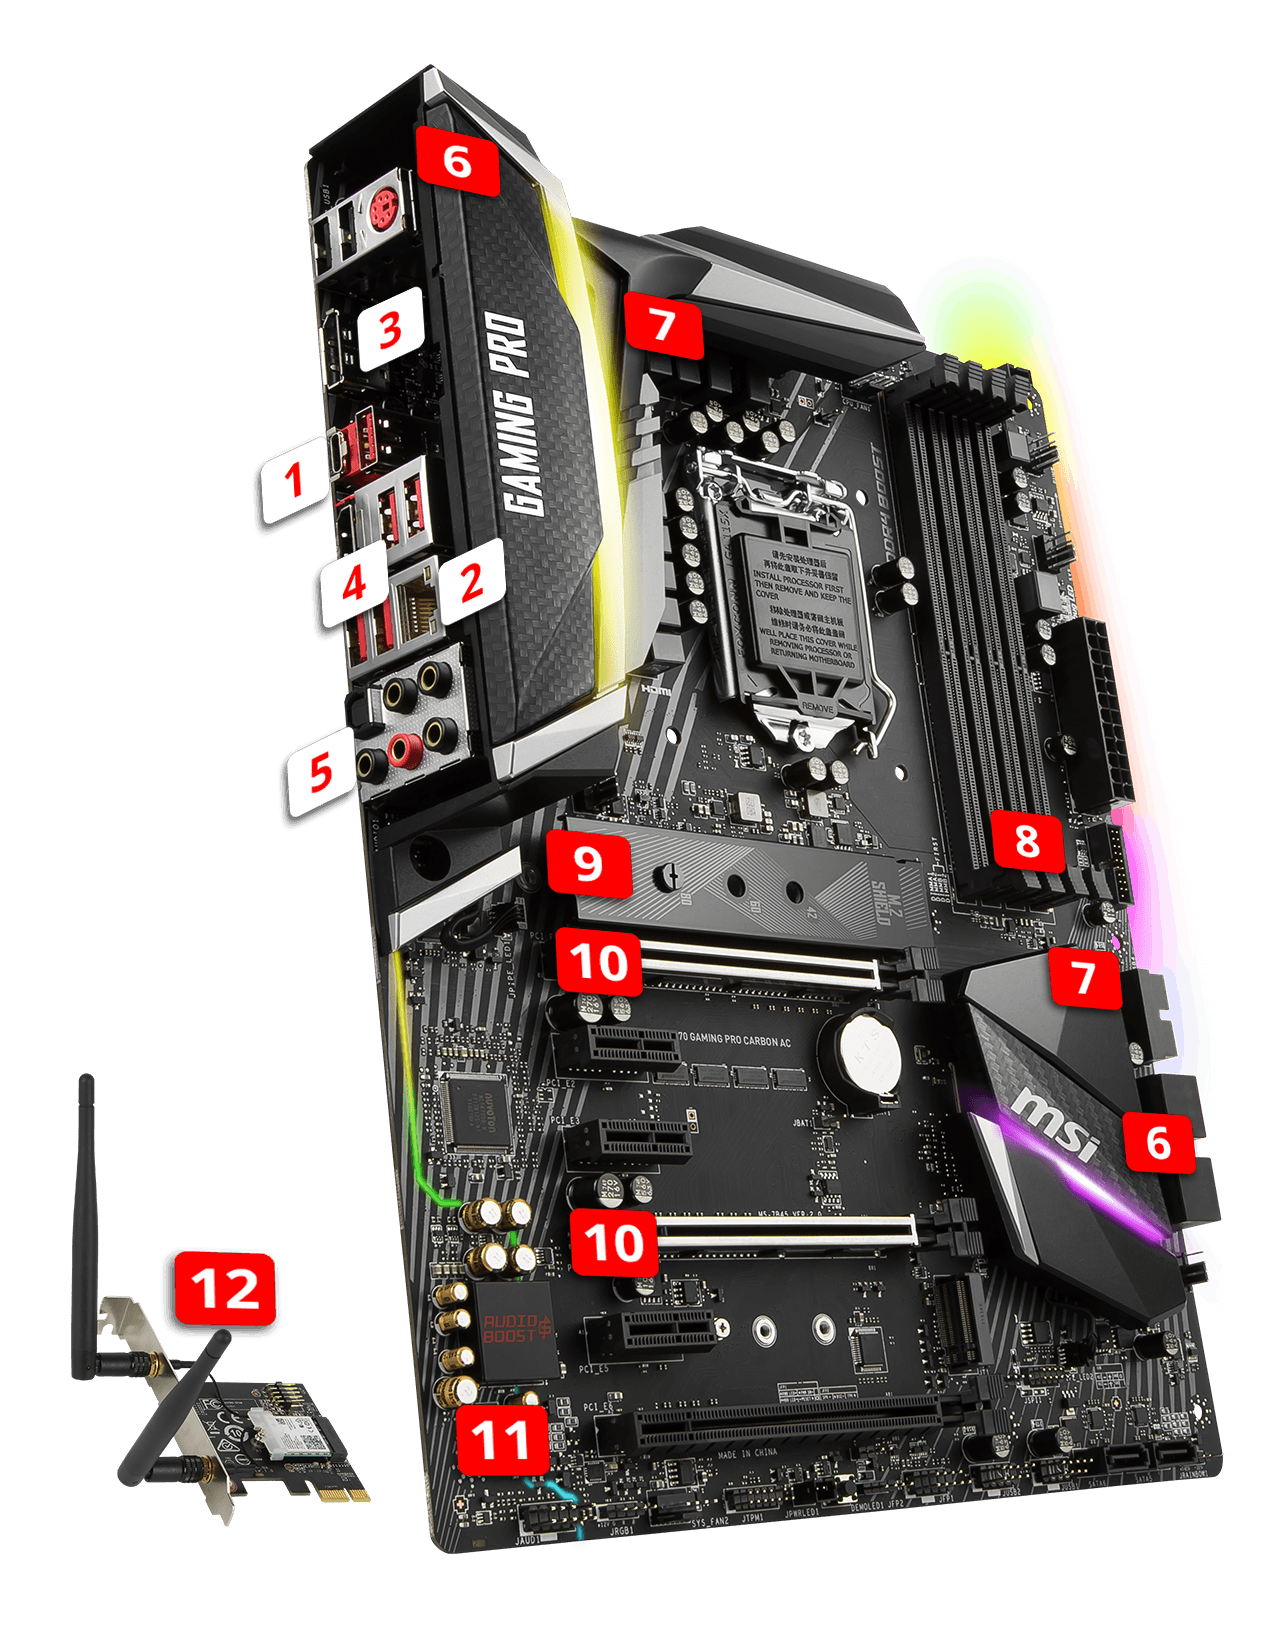 MSI Z370 GAMING PRO CARBON AC overview